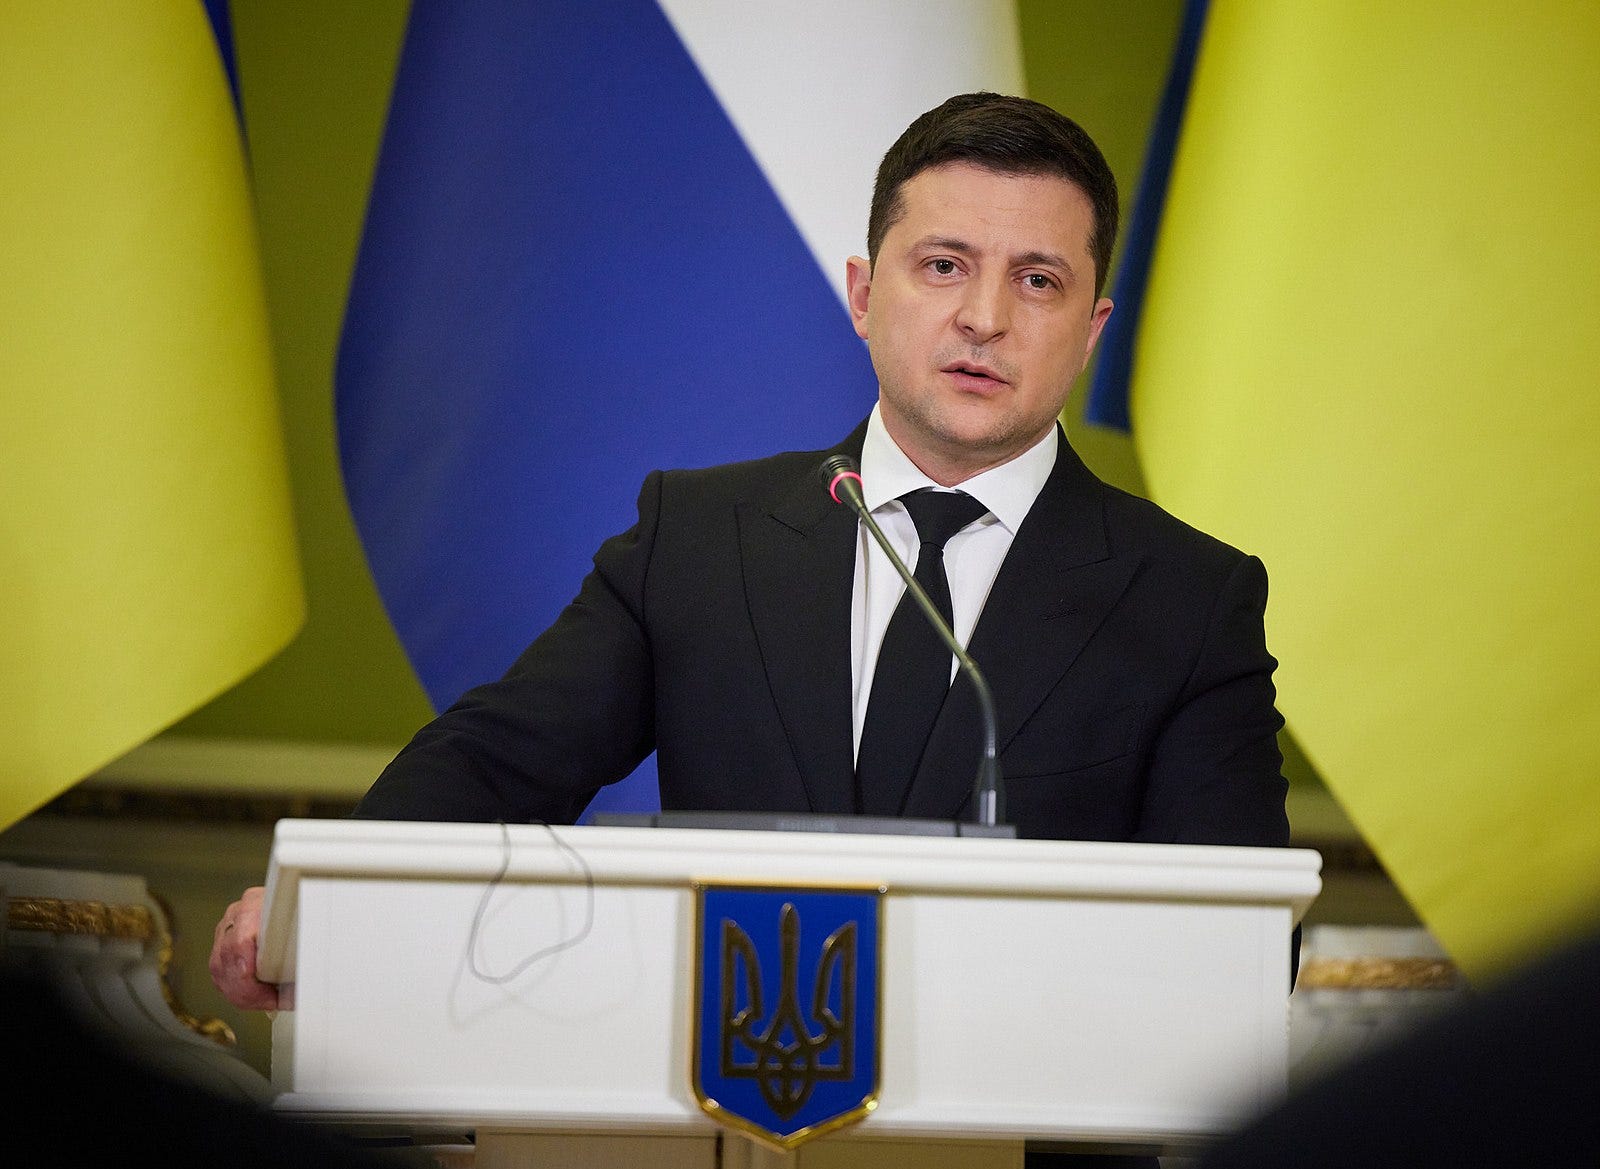 5 Things You Might Not Know About Volodymyr Zelensky, President Of Ukraine